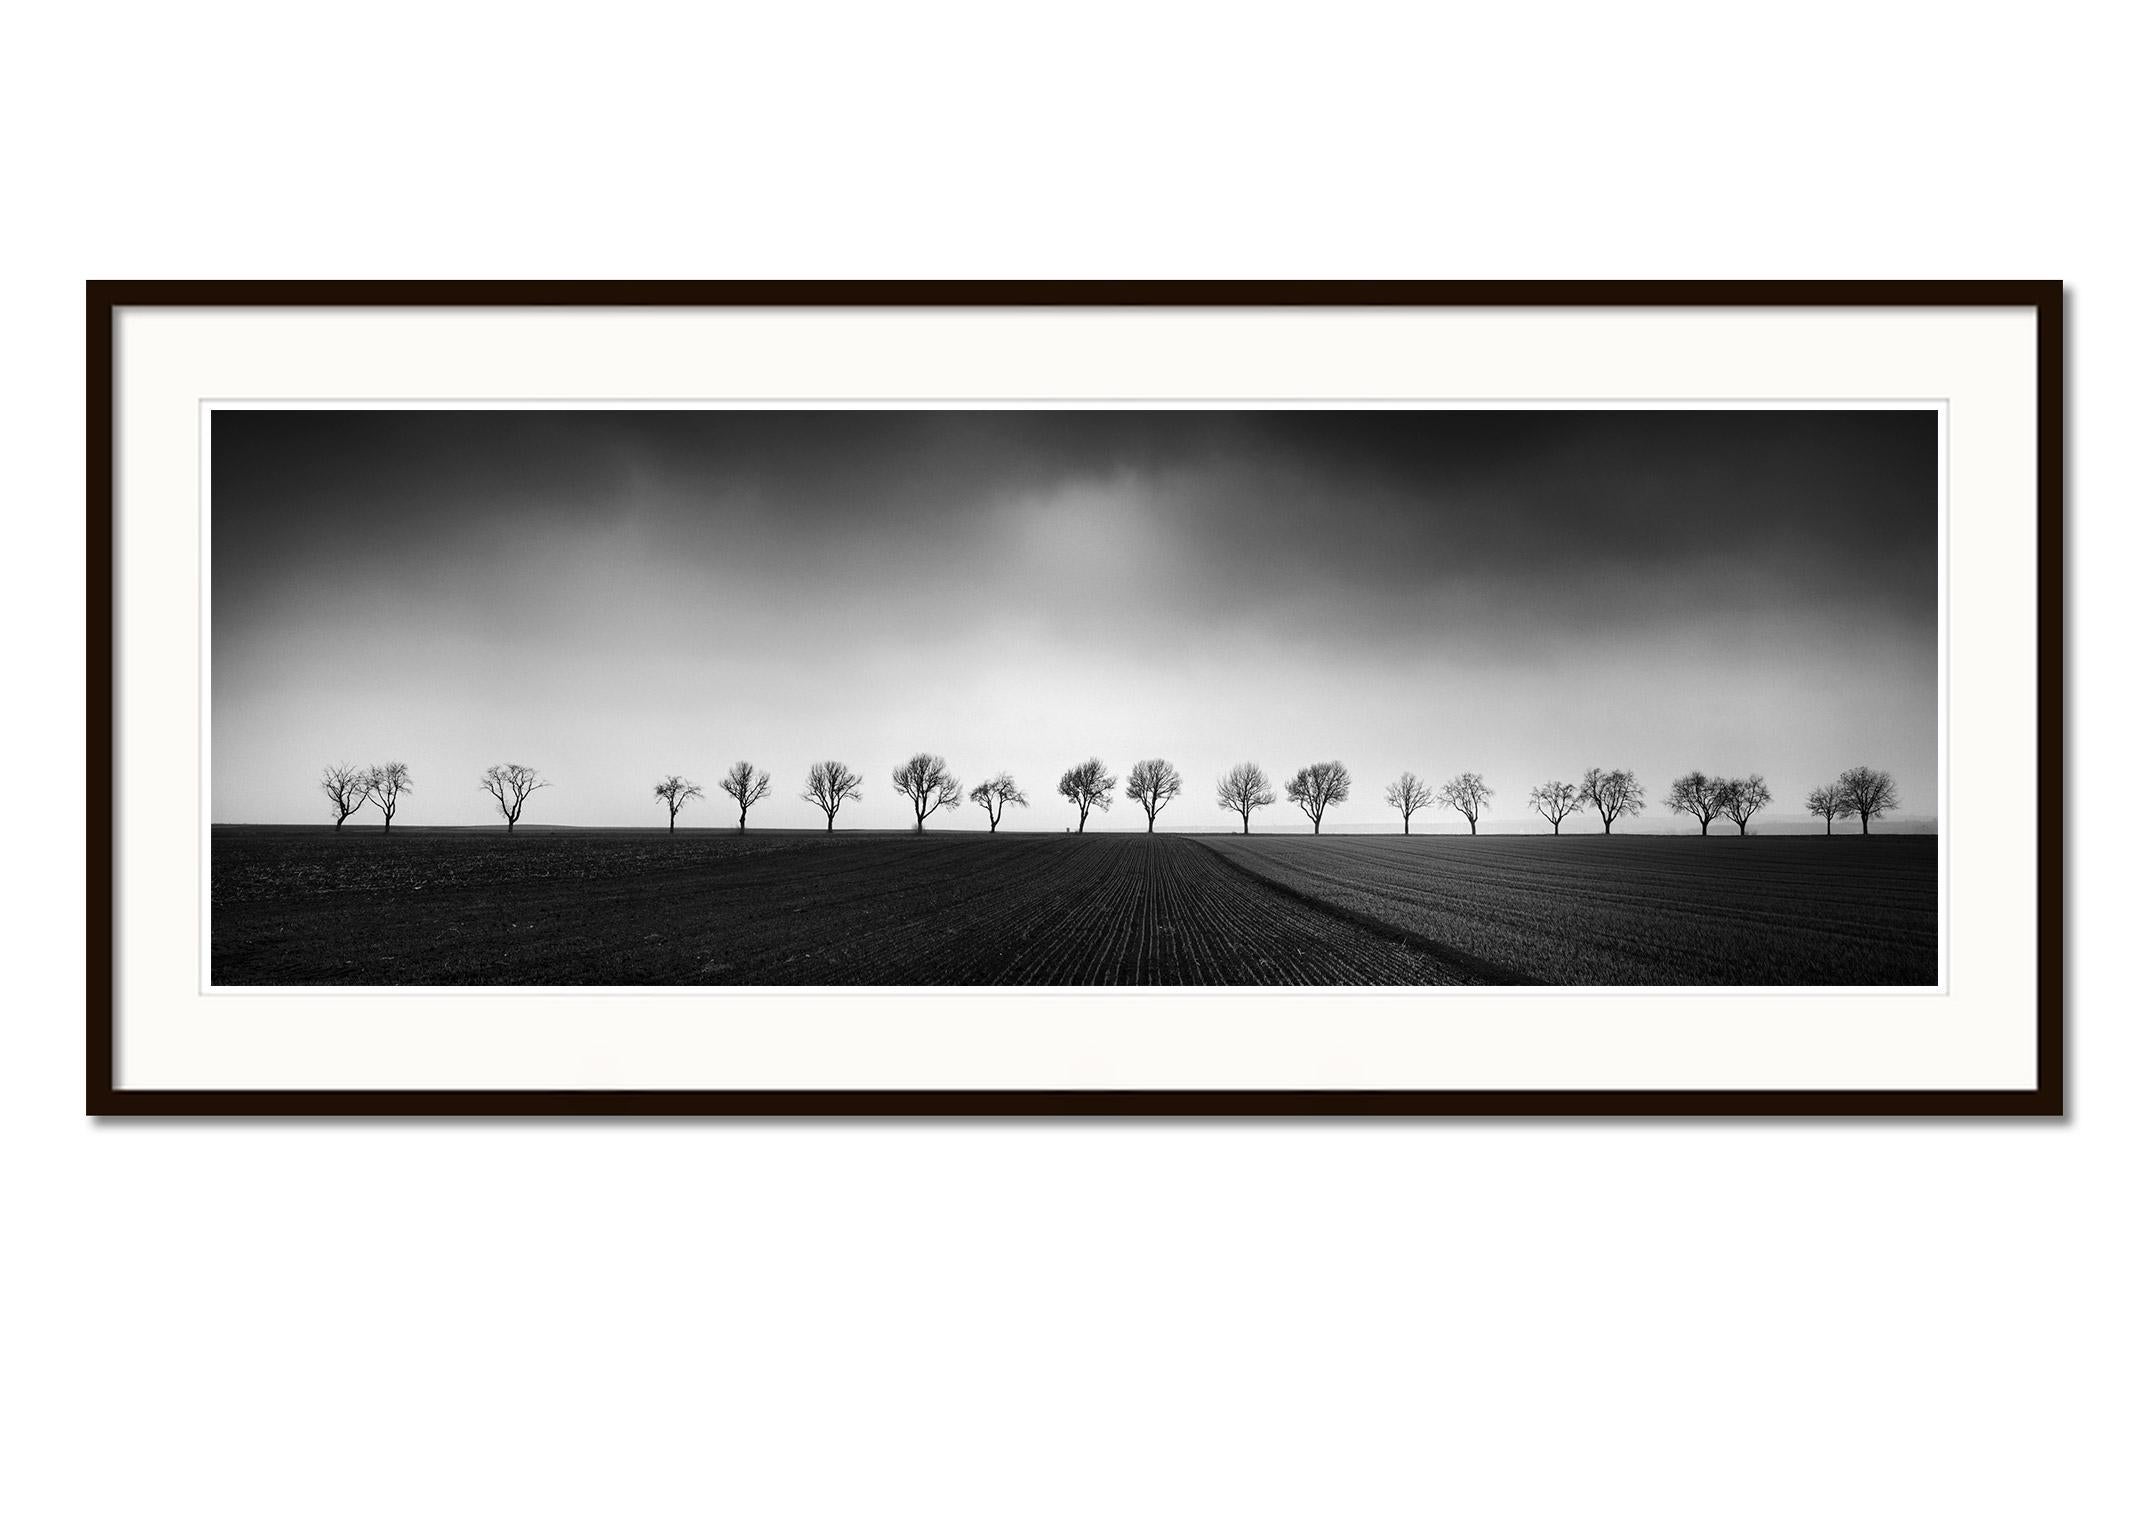 Twenty cherry Trees, avenue, black and white panorama photography, landscape - Gray Black and White Photograph by Gerald Berghammer